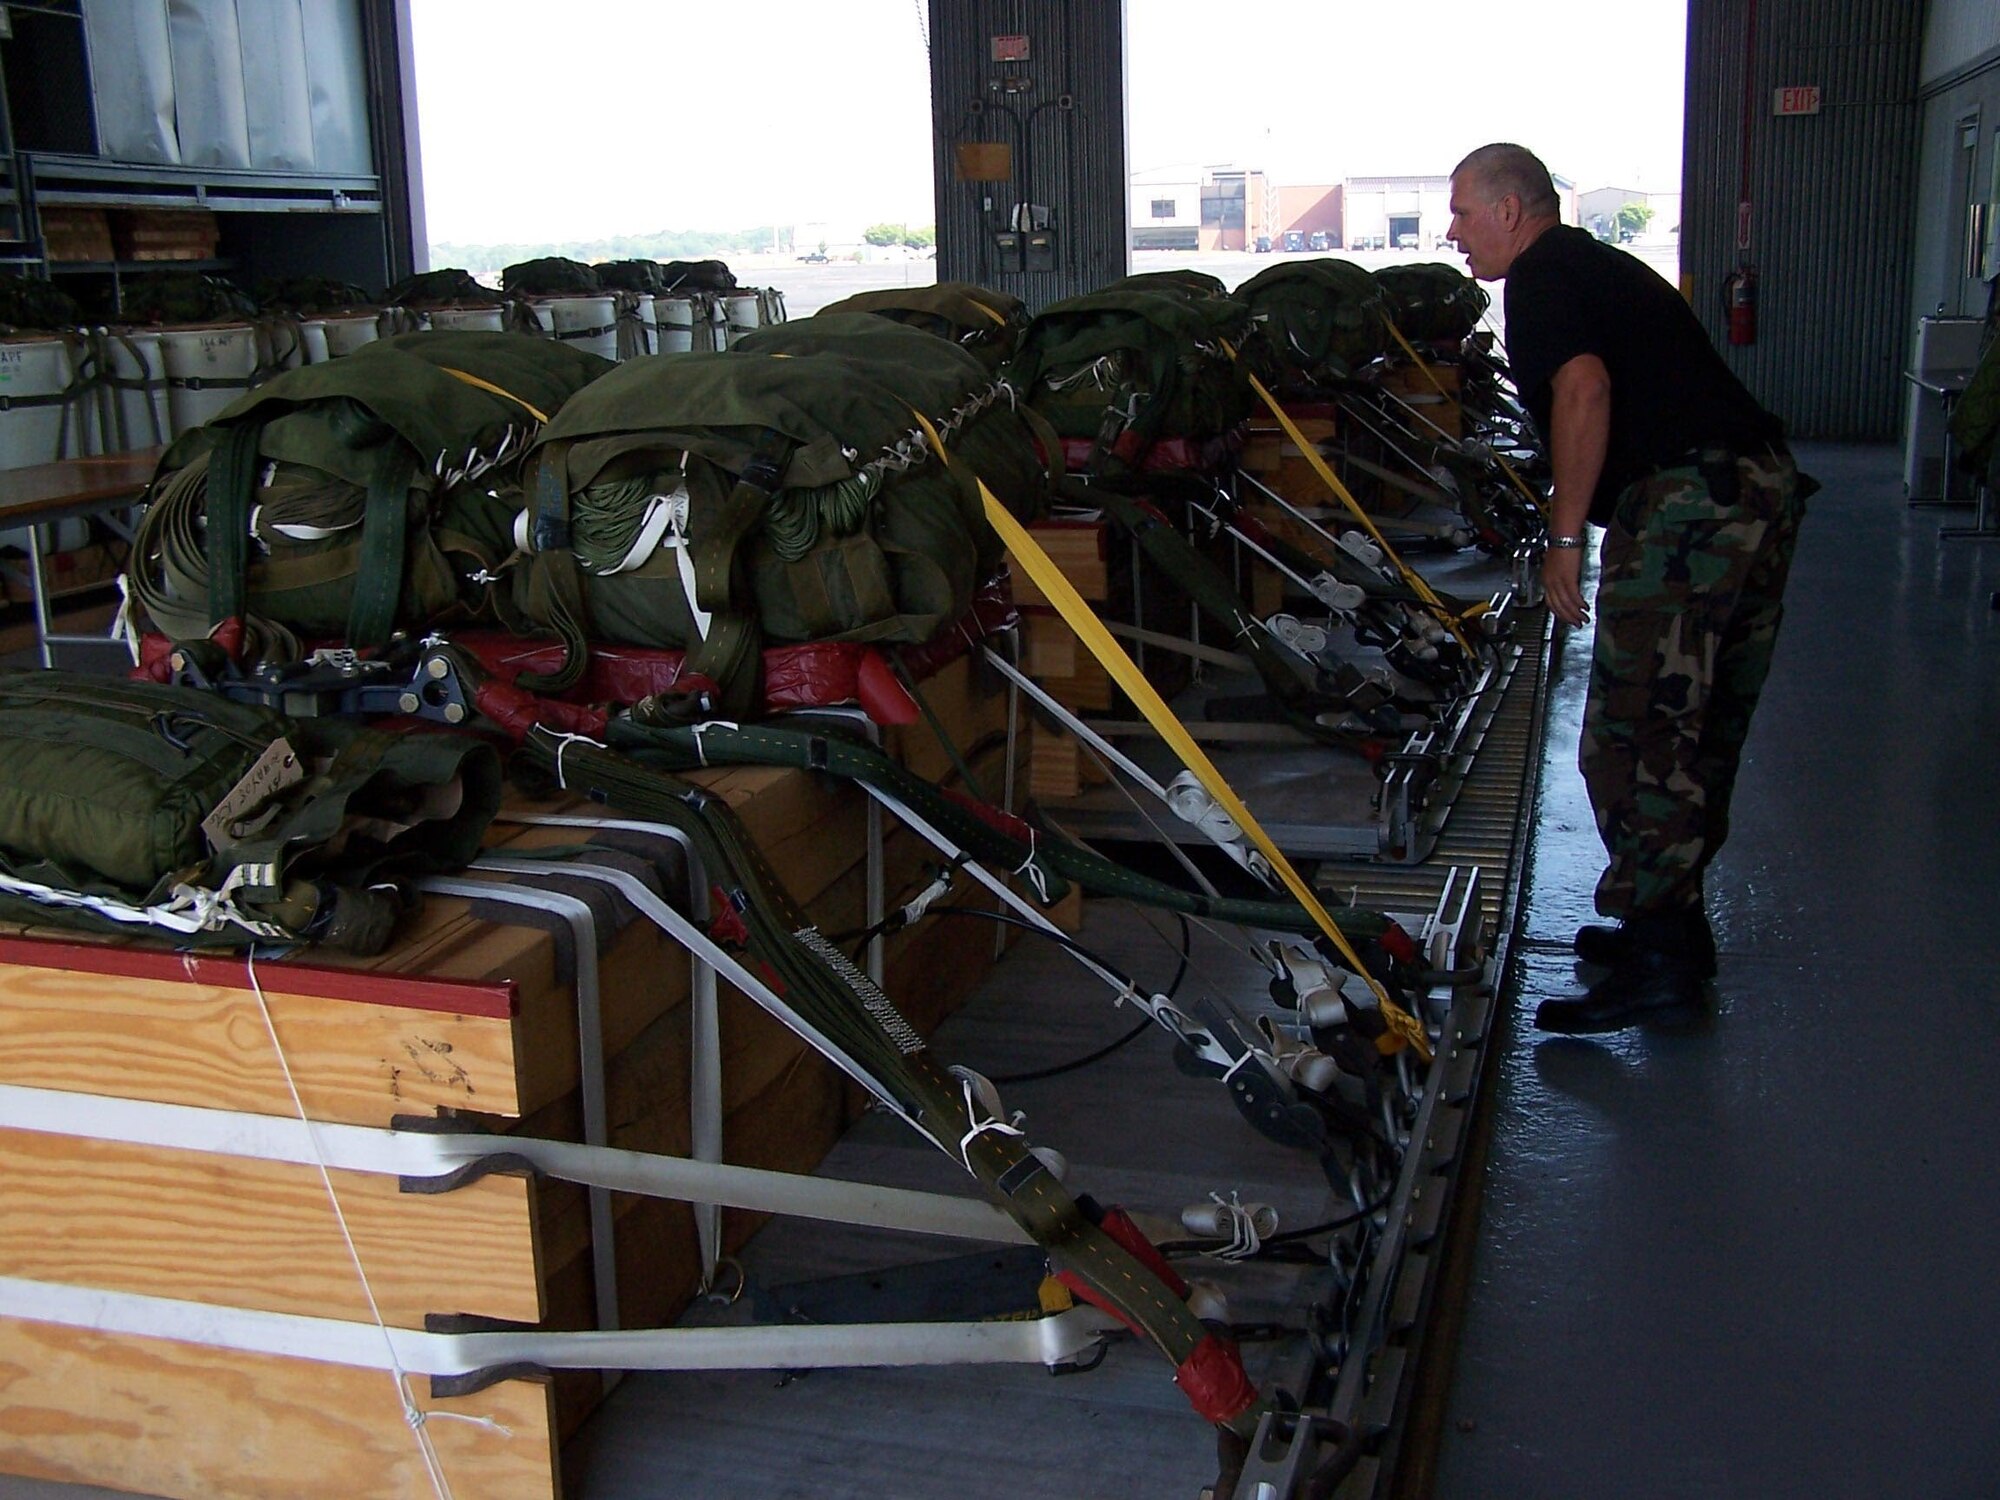 Master Sgt. Ken Grabowski, 166th Aerial Port Flight, Delaware Air National Guard, checks pallet documentaton sheets for heavy equipment loads used for air drop training missions by 166th Airlift Wing C-130 transport aircraft.